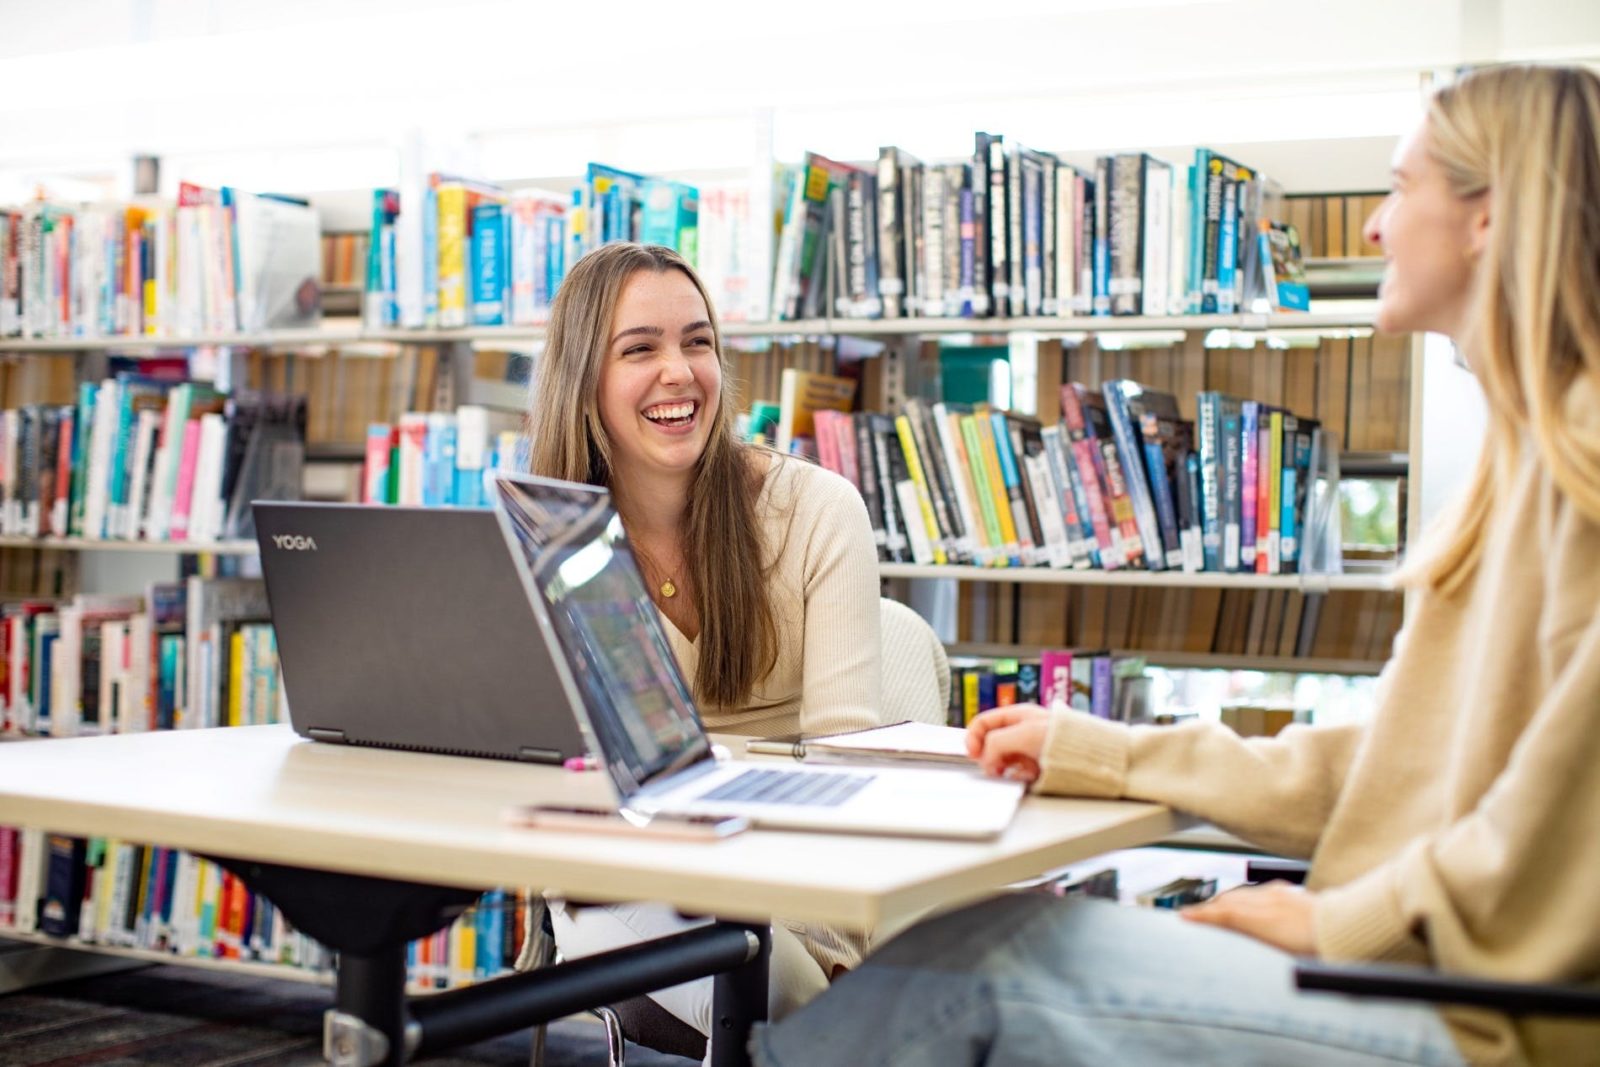 Two young women laugh while working on laptops in the library